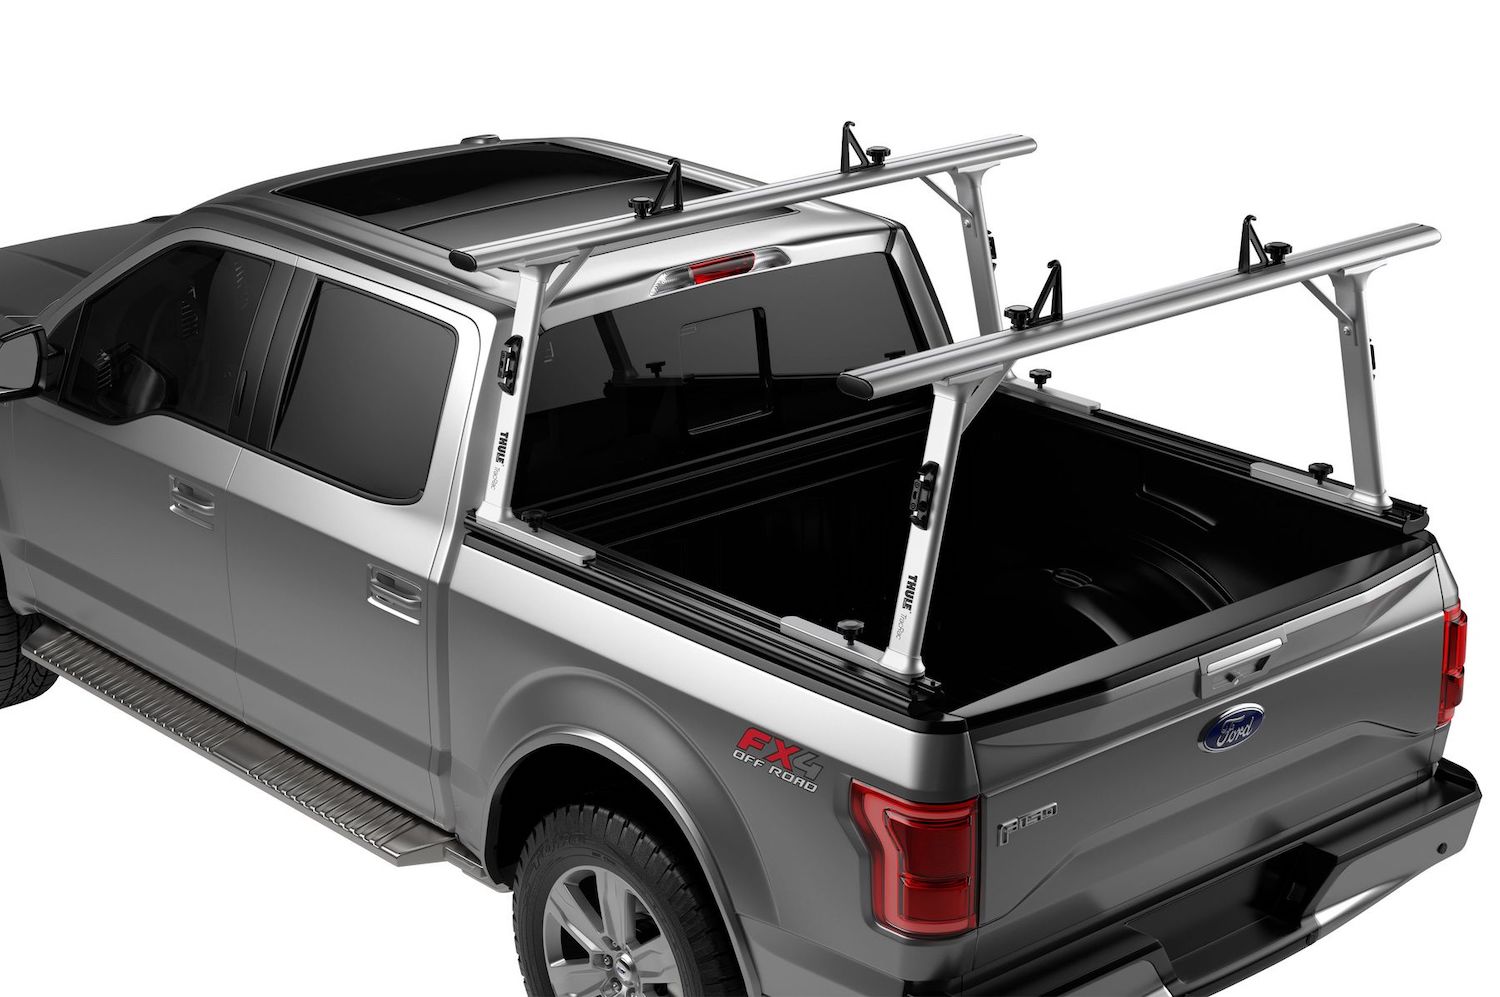 Promo photo of an aluminum ladder rack on a gray Ford F-150 pickup truck.